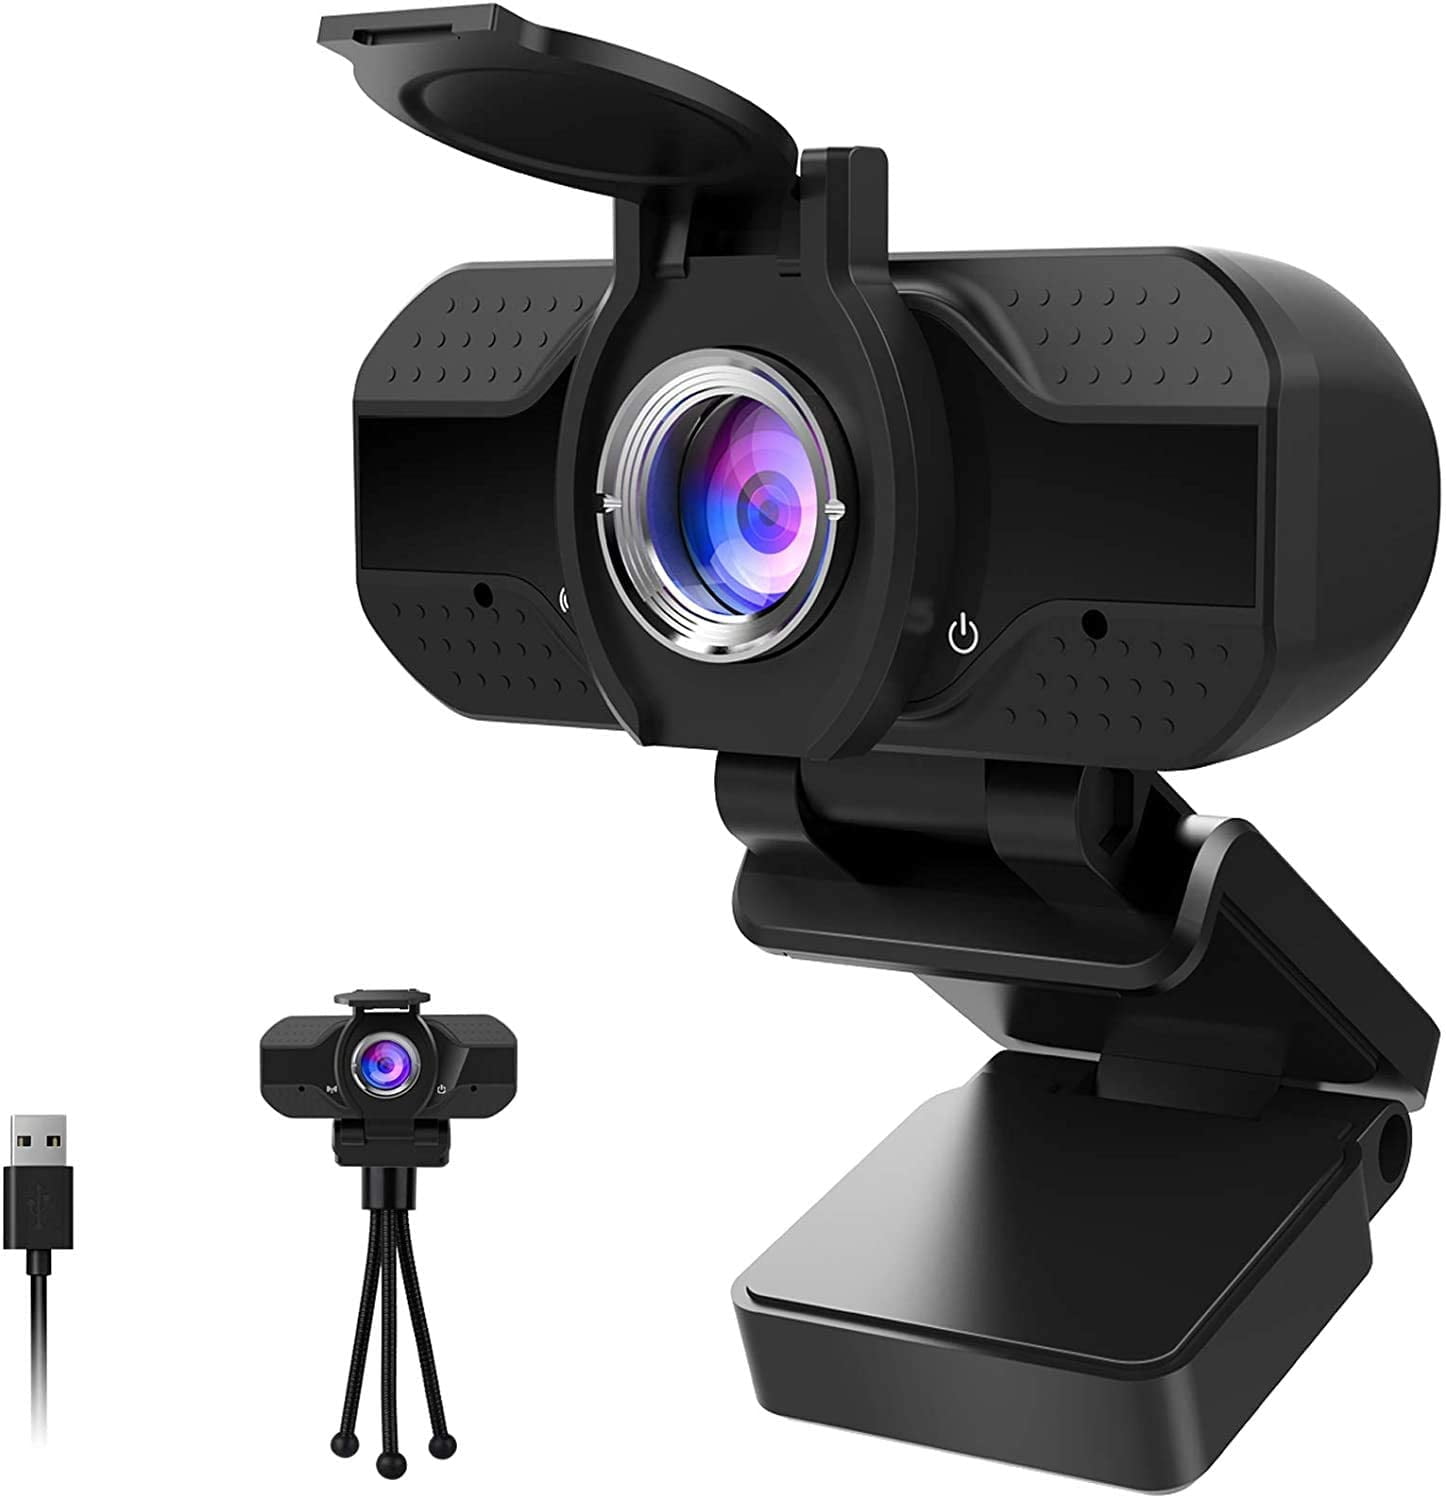 Conference Crosstour Full HD Live Webcam Streaming Video Camera for Computers PC Laptop Desktop Dual Built-in Microphones Online Study Video Calling 1080P Webcam 